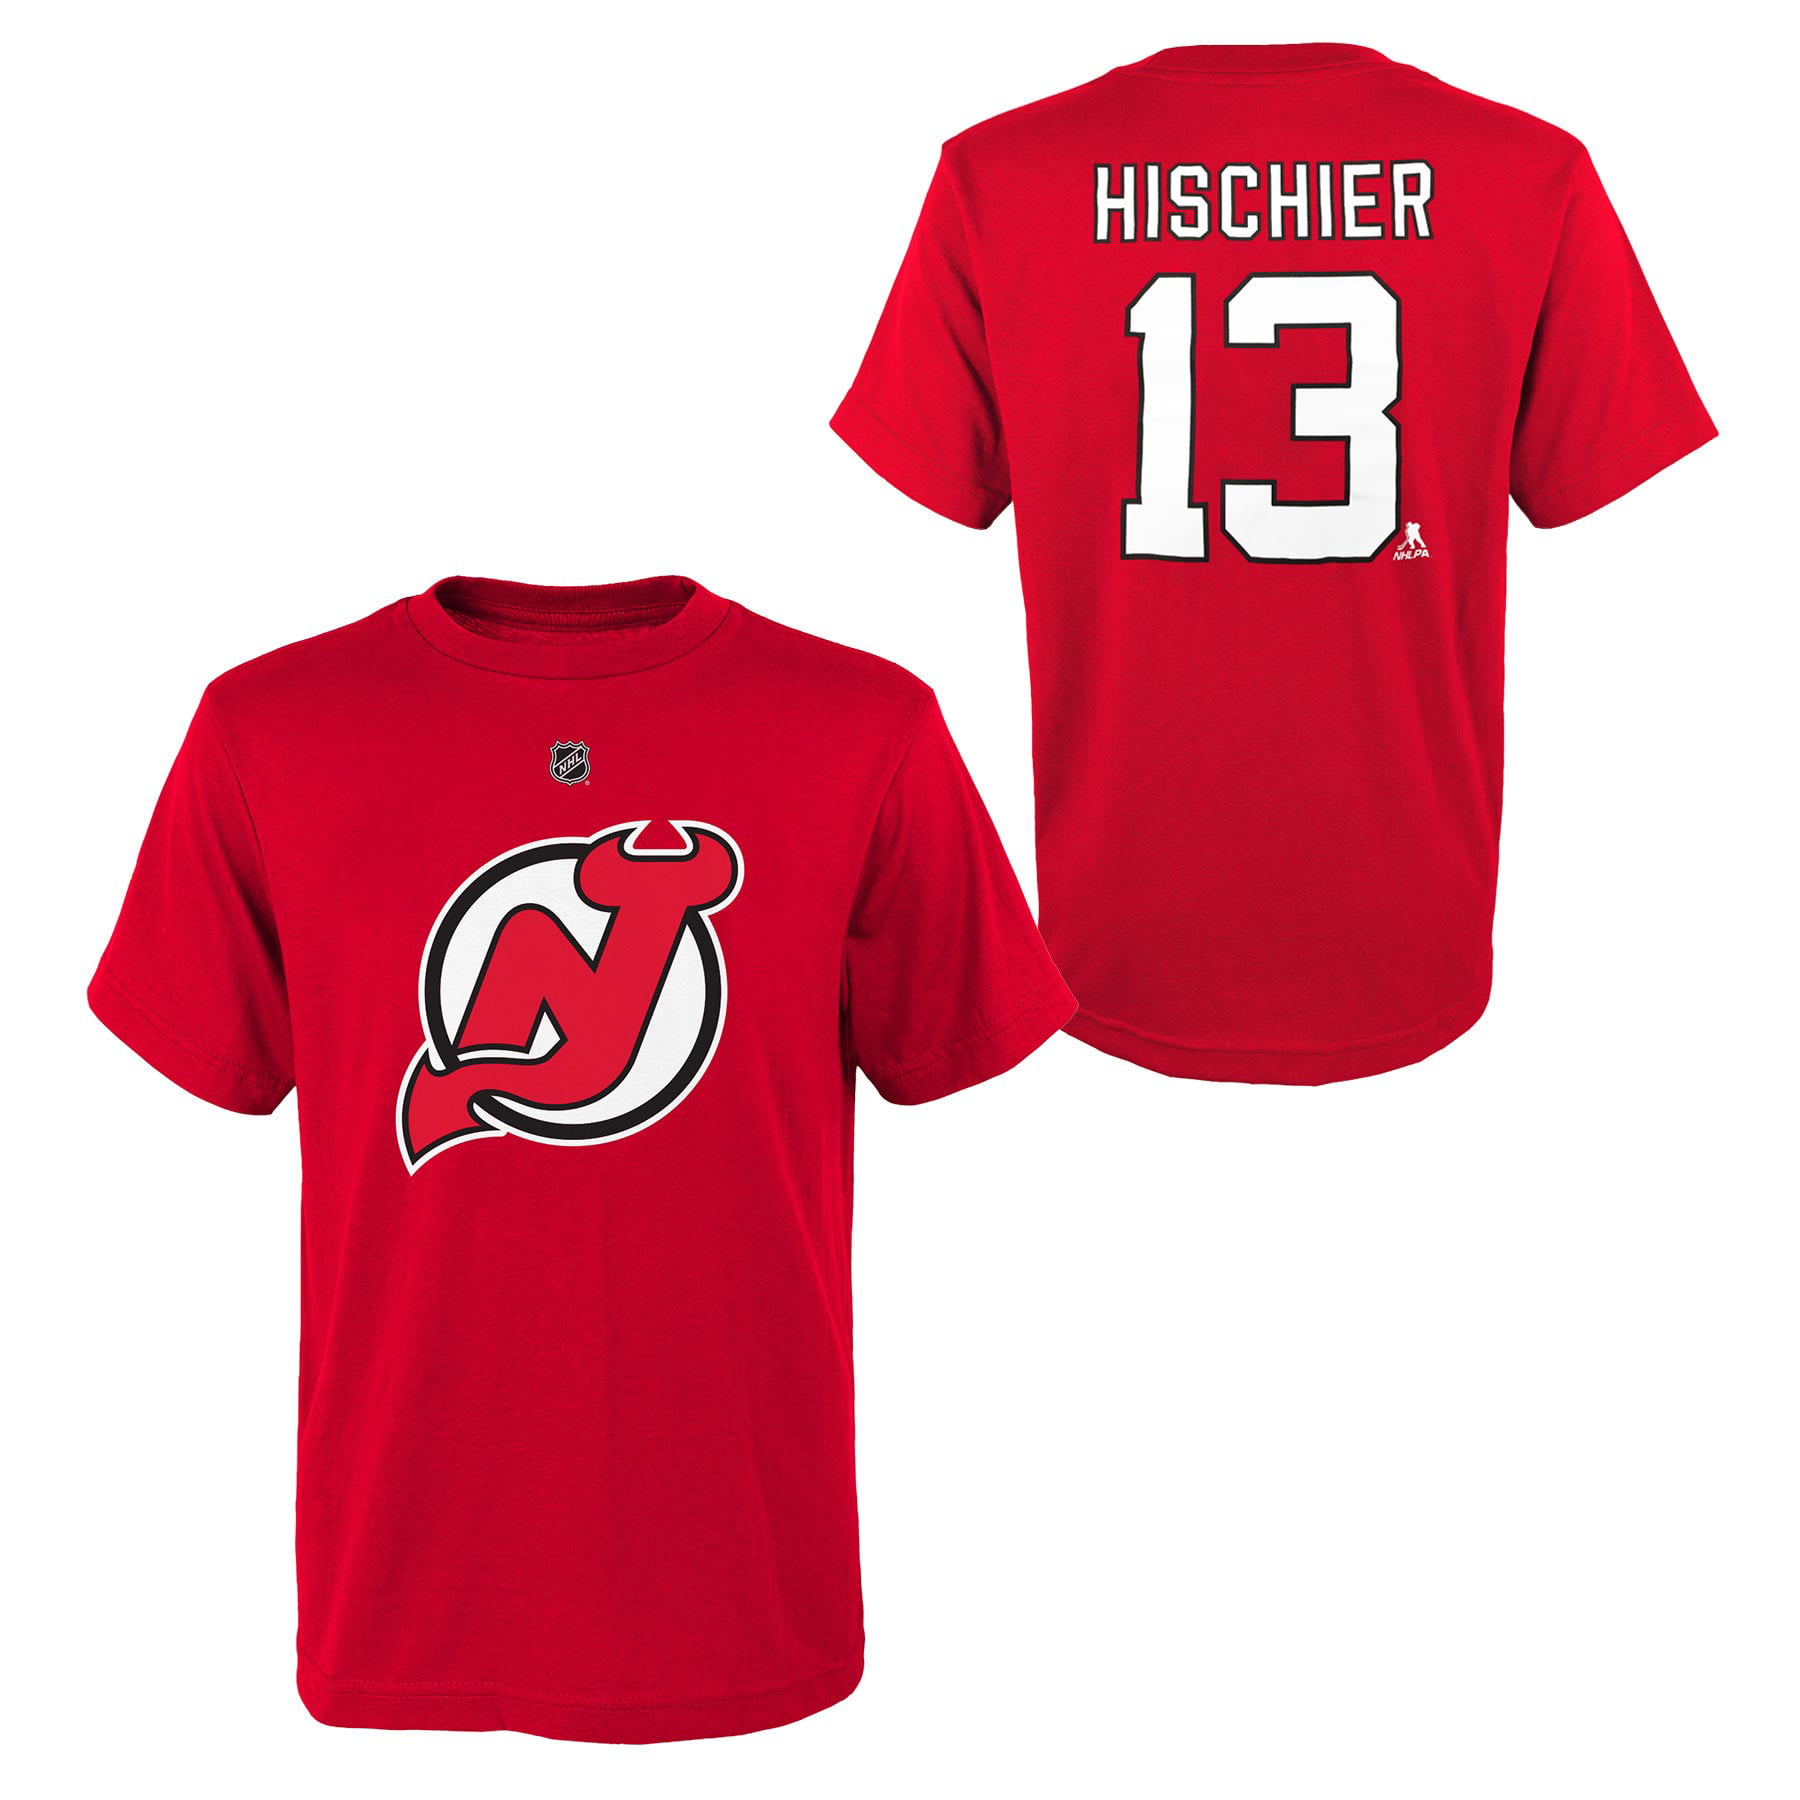 new jersey devils youth apparel